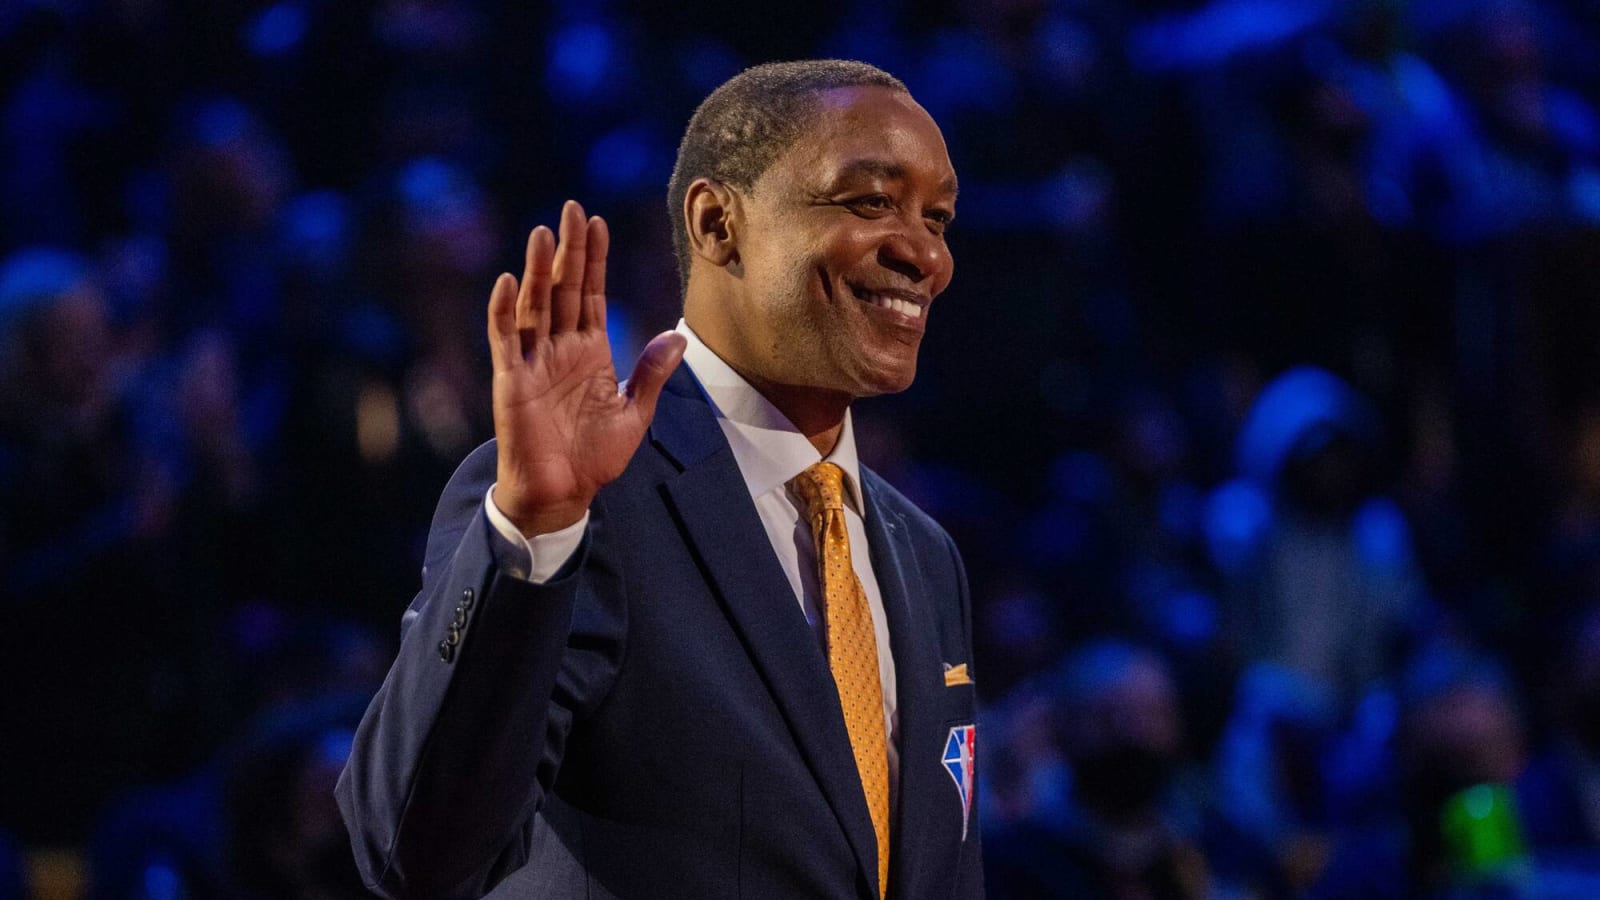 Isiah Thomas Appreciates What Michael Jordan Did For The NBA: "He Took It To A Level That None Of Us Could"